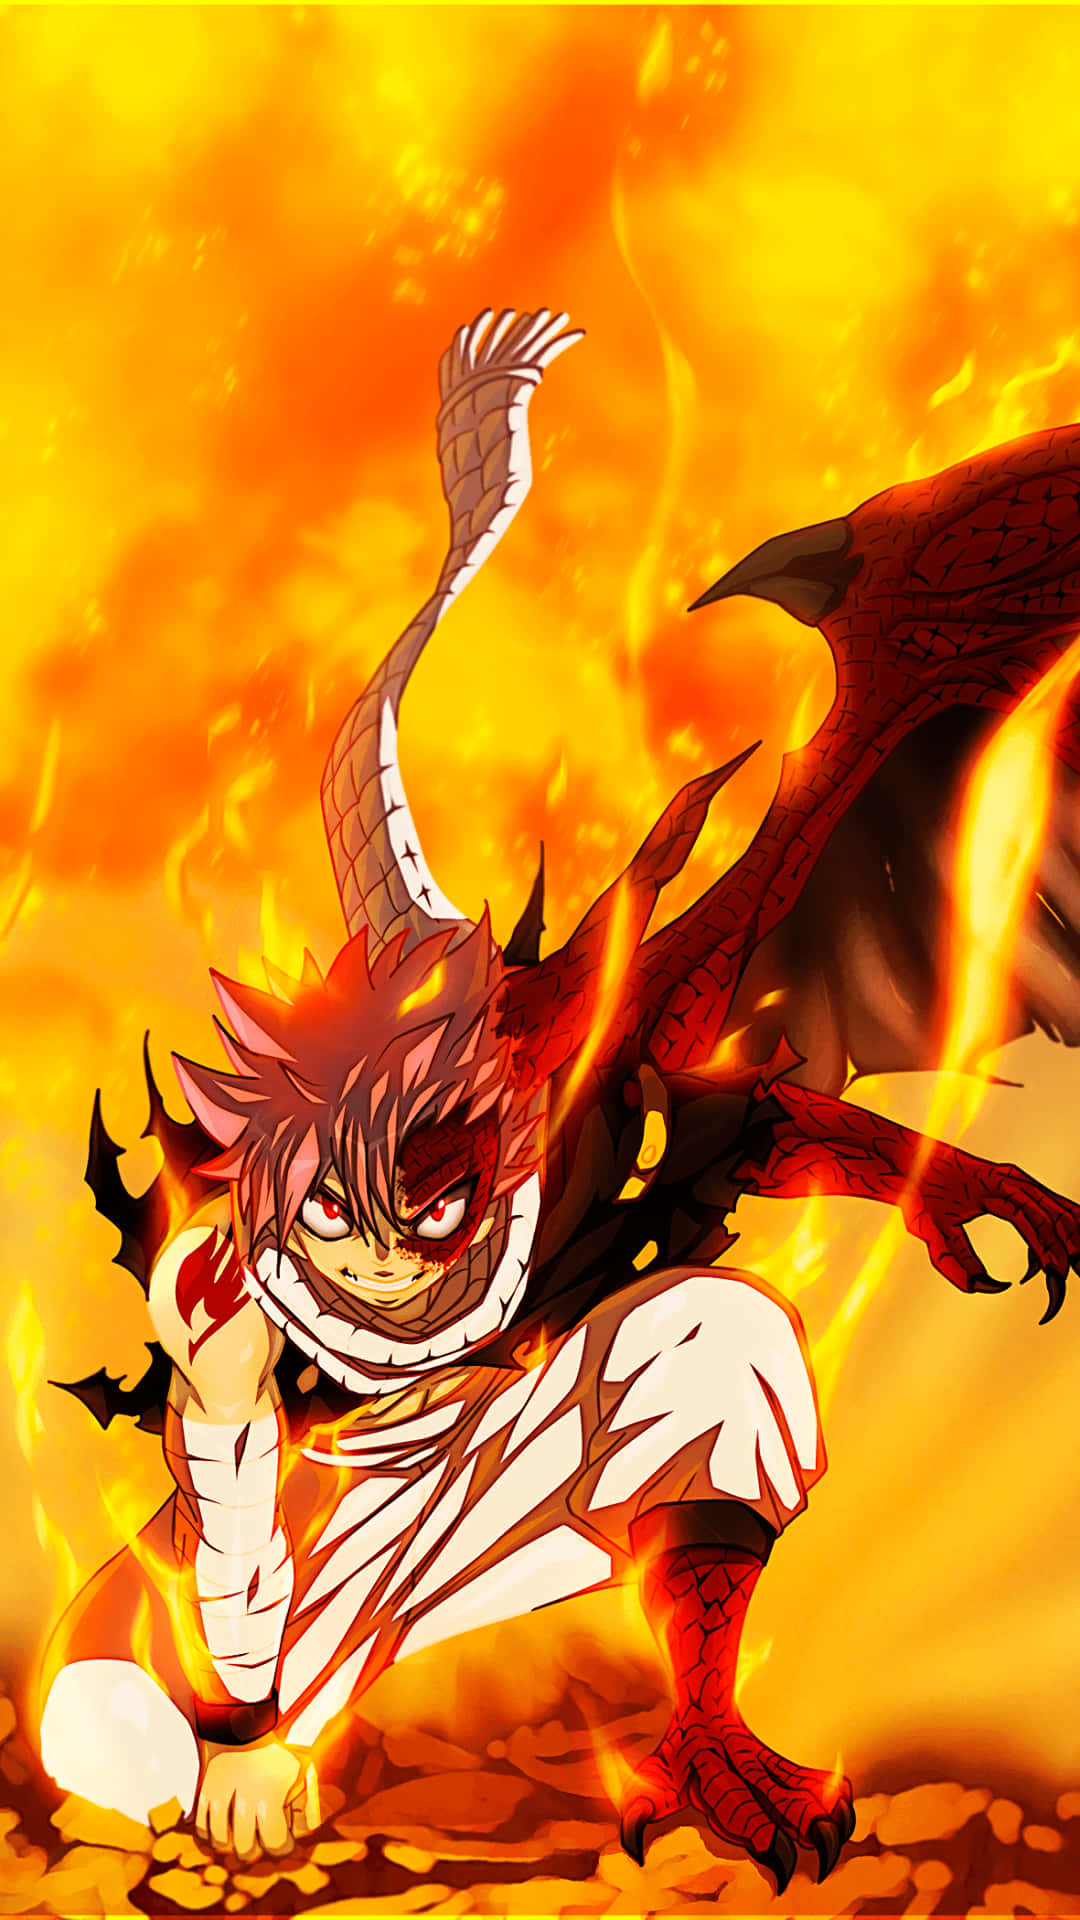 Fairy Tail Iphone 1080 X 1920 Wallpaper